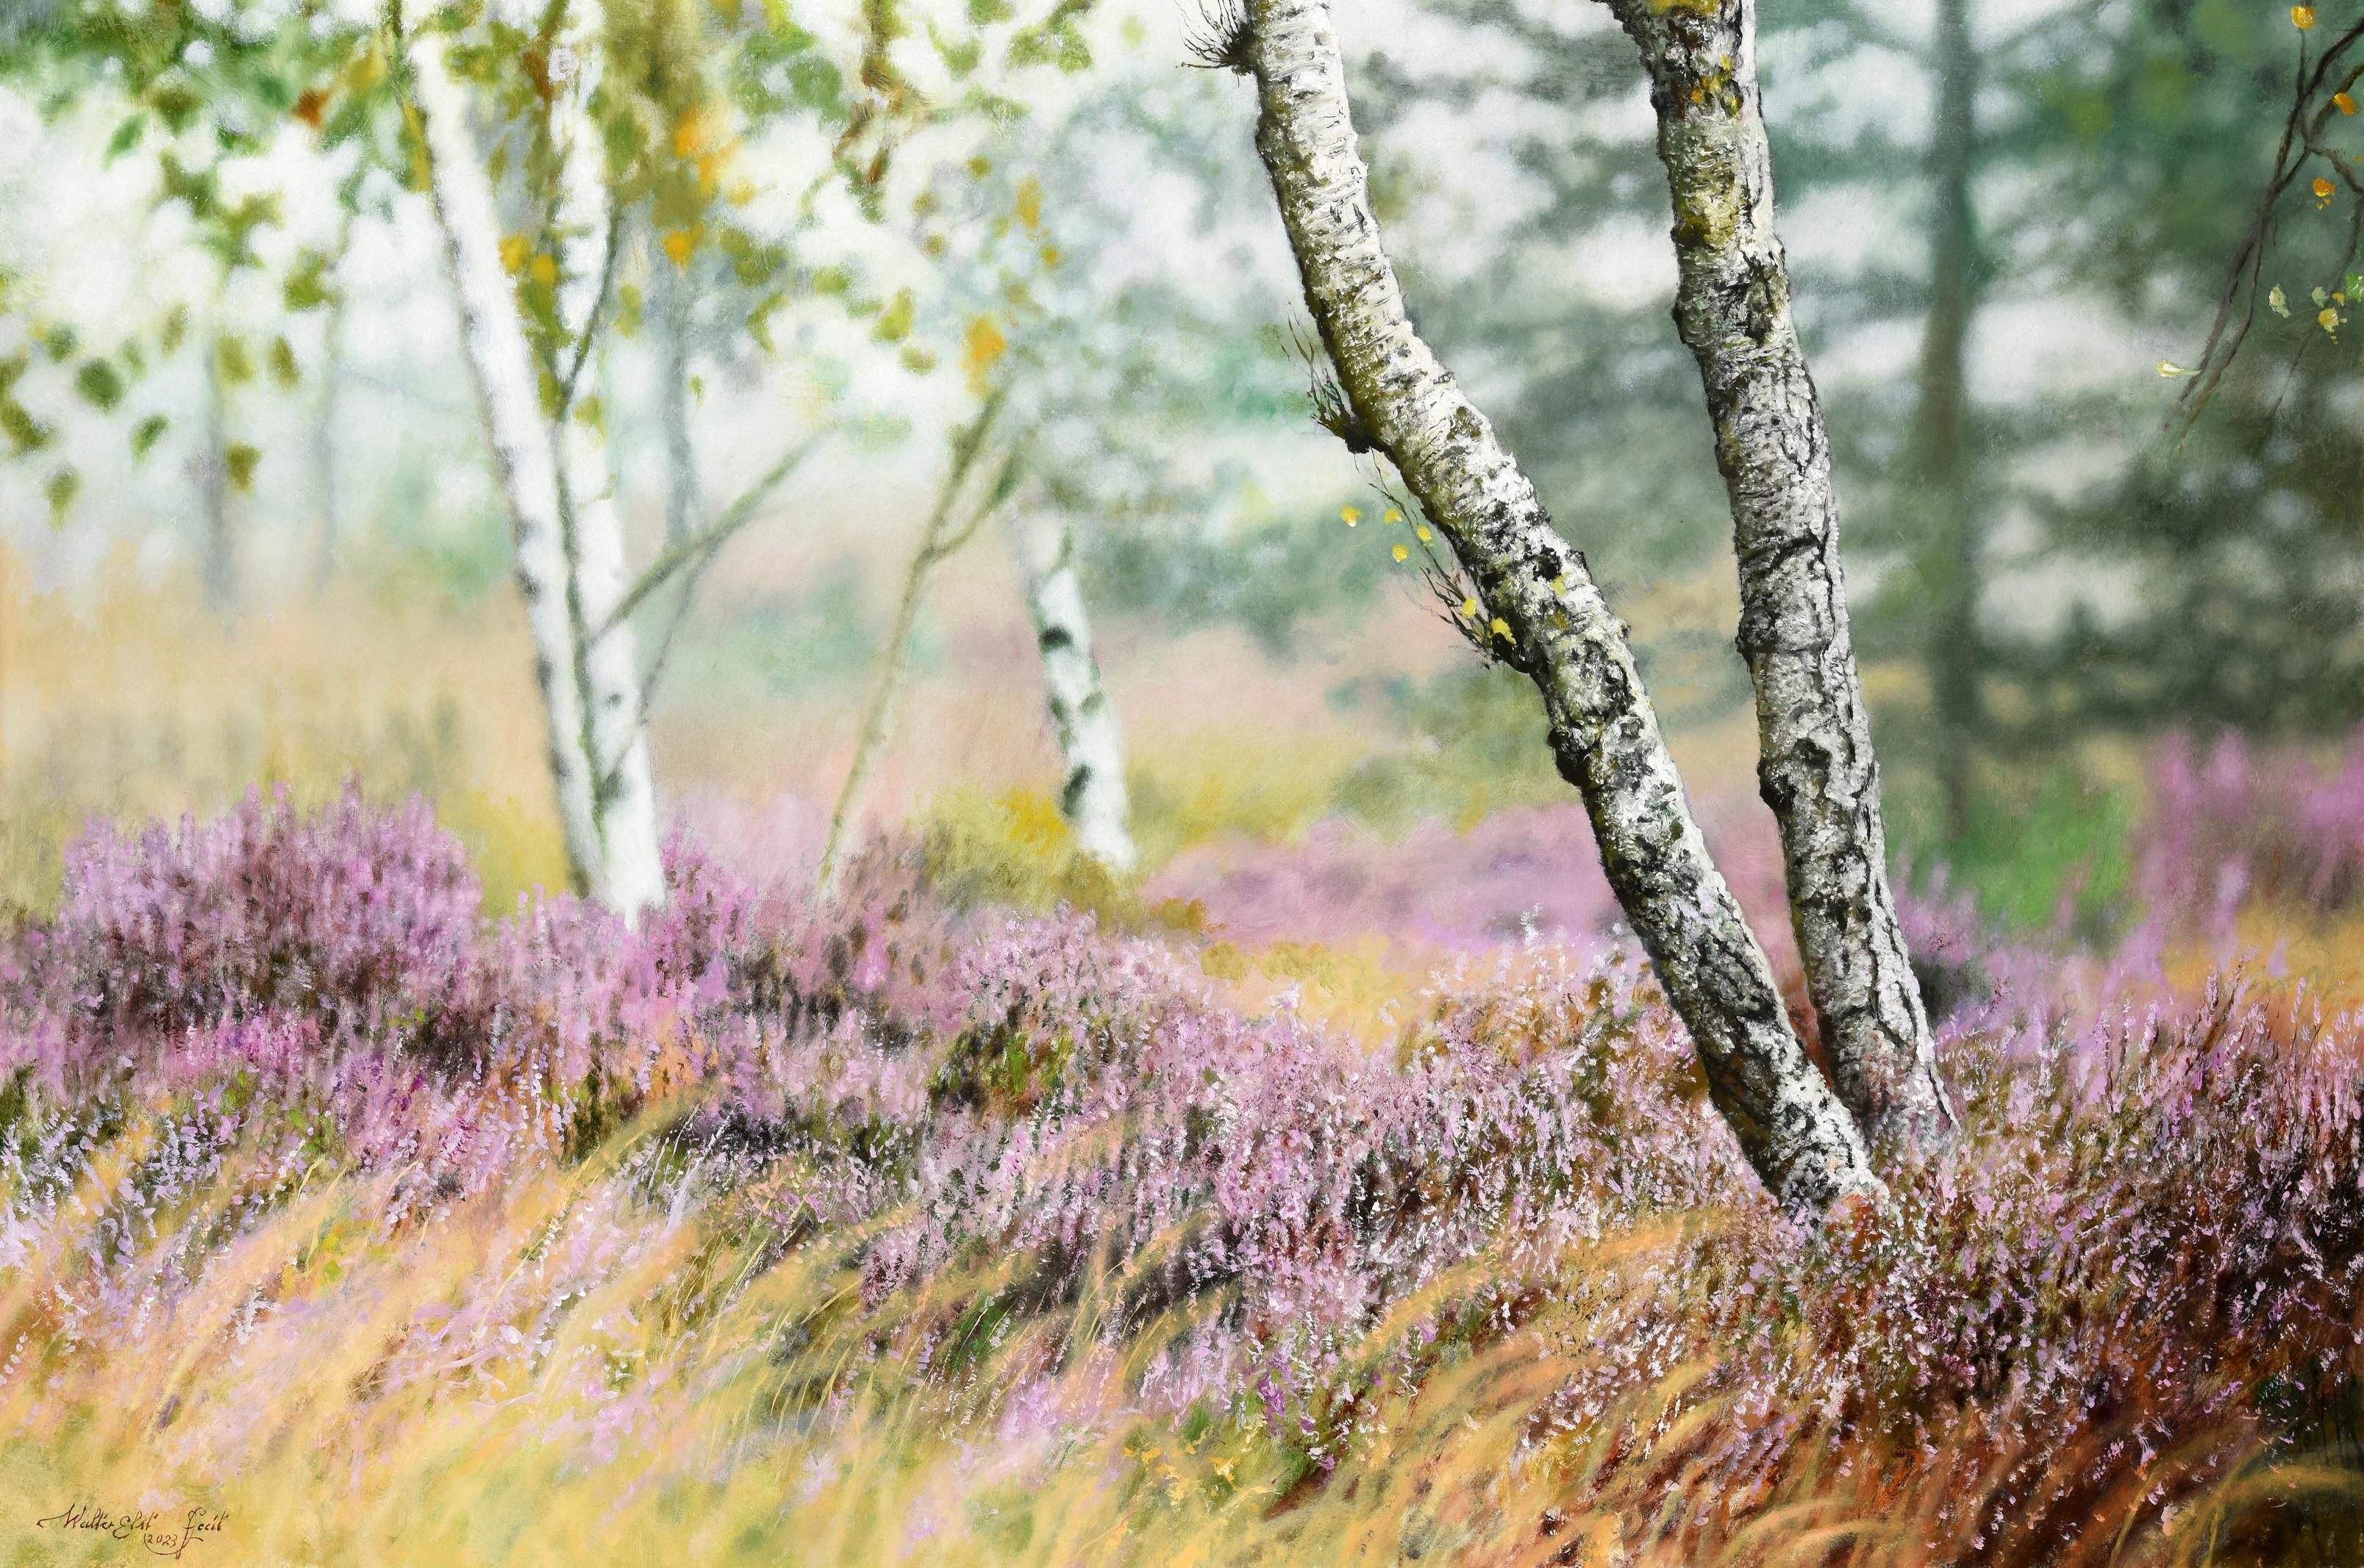 Heide in Bloei Heather in Bloom Oil Painting on Panel Landscape In Stock - Sizes are measured without frame 

Walter Elst Born in Antwerp, Belgium - 1955  After finishing his study Medicine at the University of Brussels Walter Elst decided to